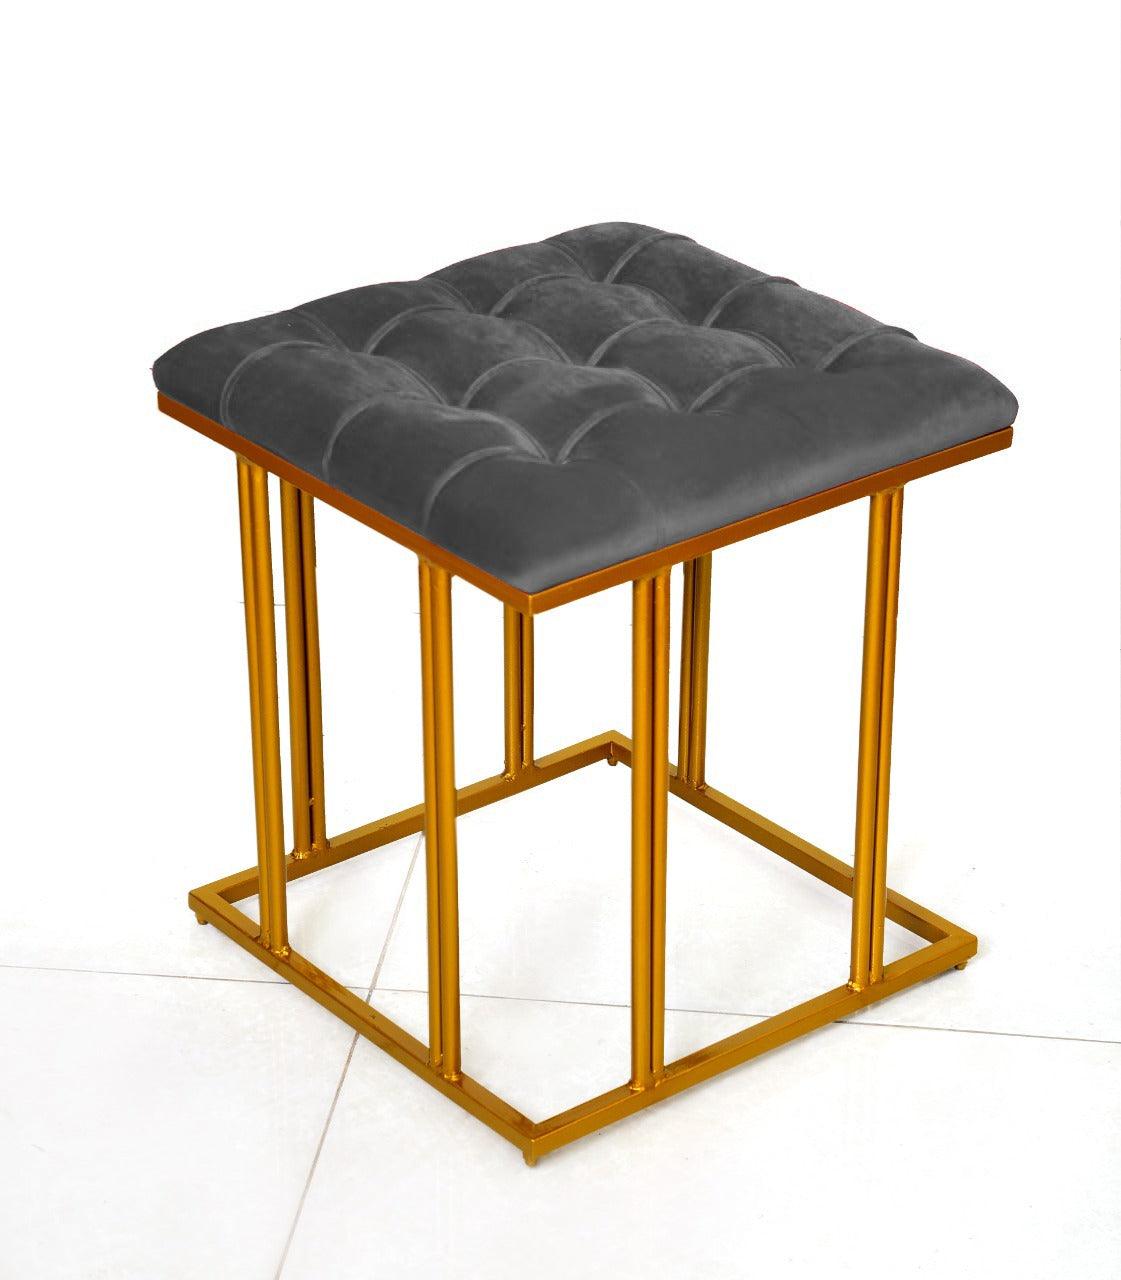 Luxury Velvet Square Stool With Steel Stand -910 - 92Bedding